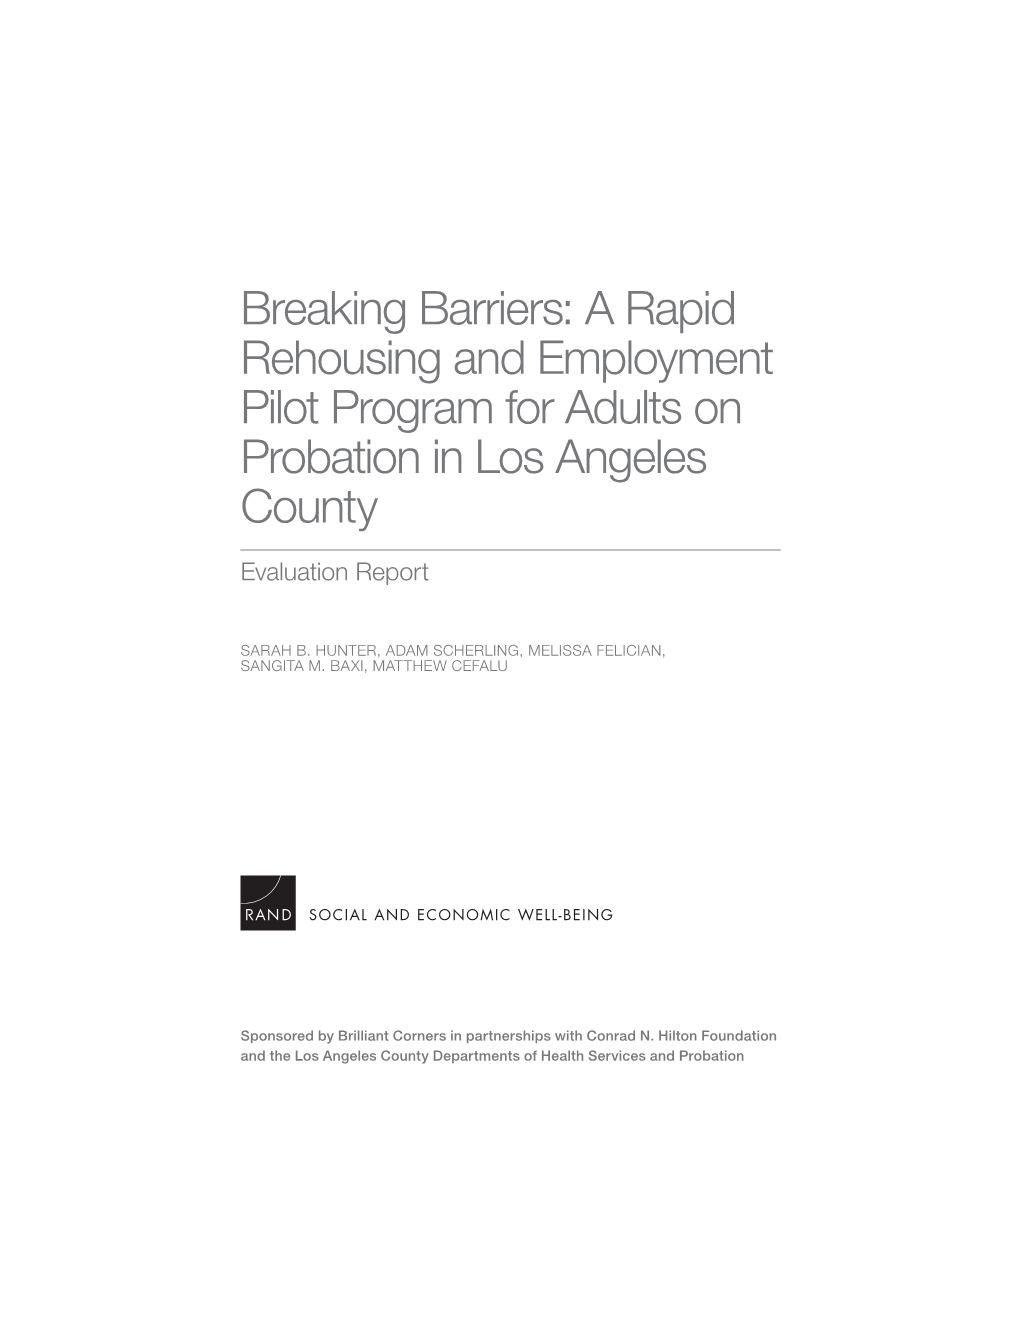 Breaking Barriers: a Rapid Rehousing and Employment Pilot Program for Adults on Probation in Los Angeles County